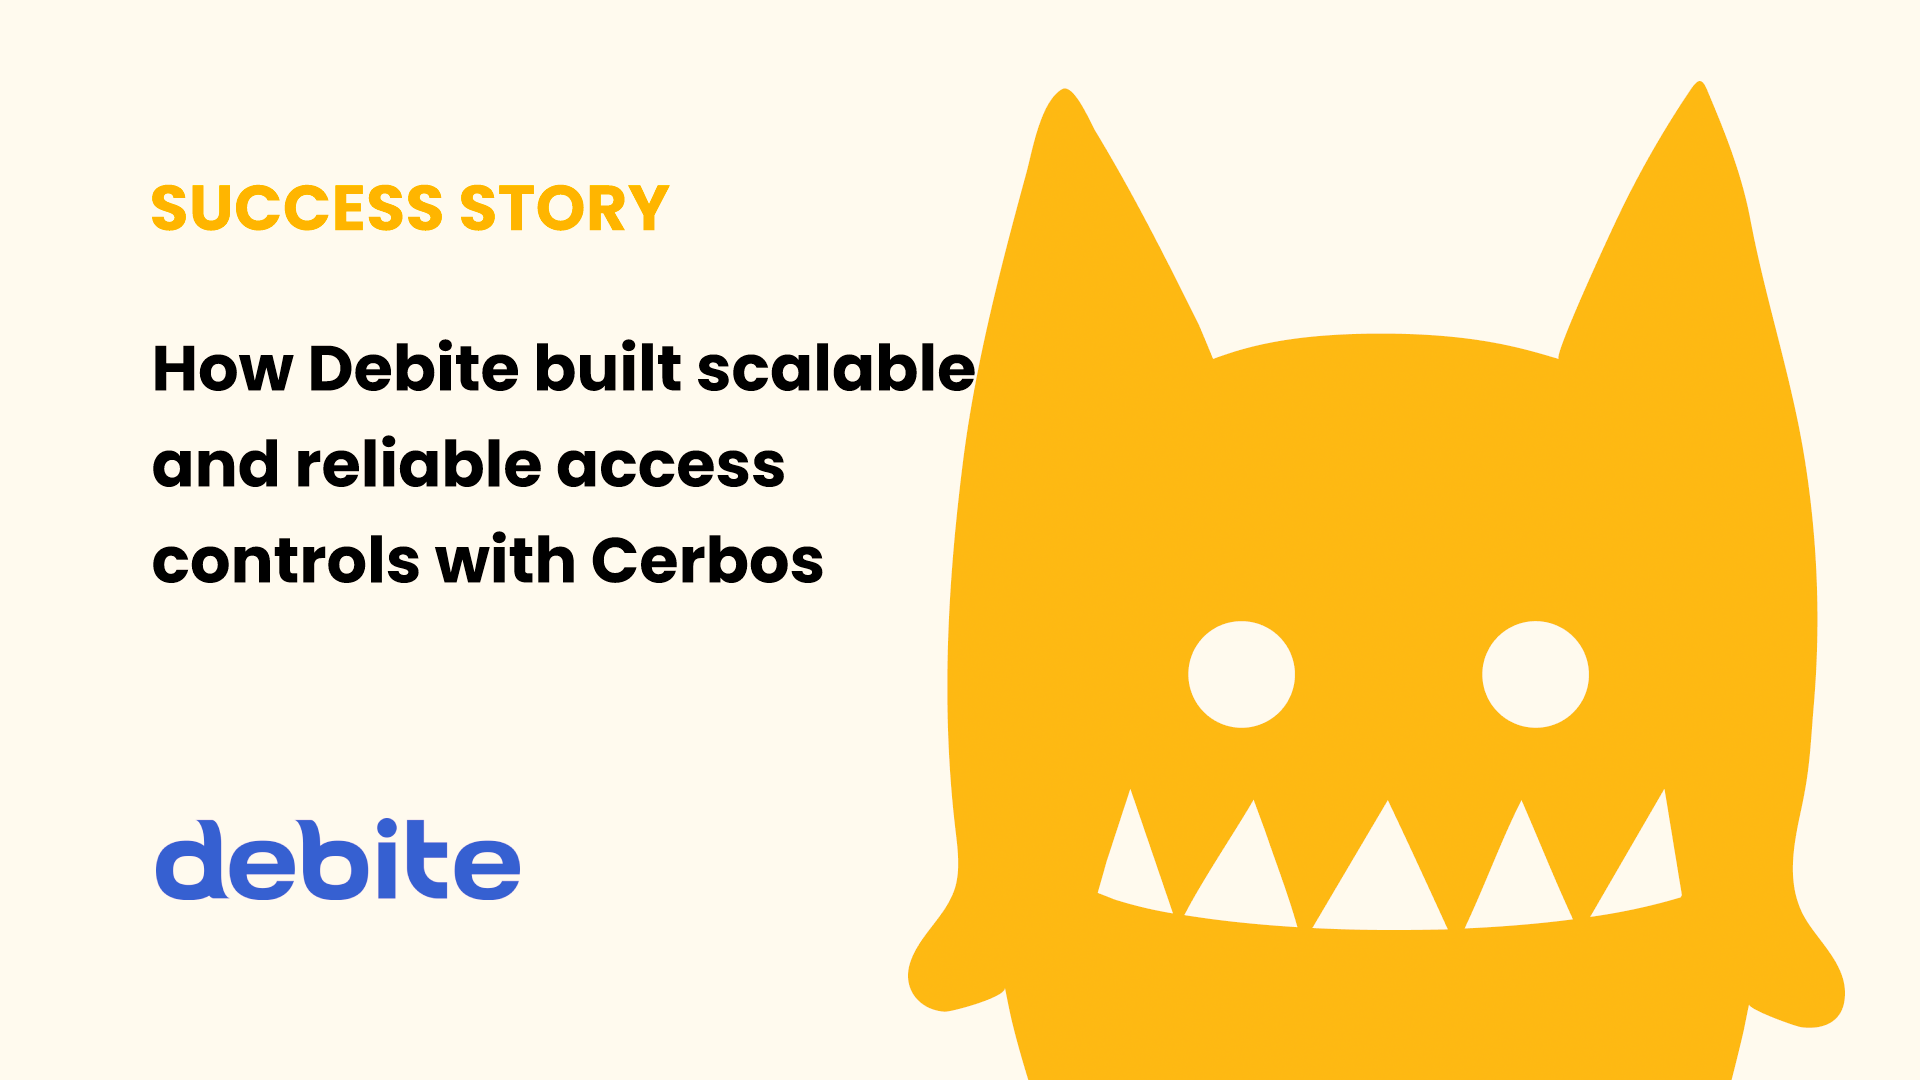 How Debite built scalable and reliable access controls with Cerbos